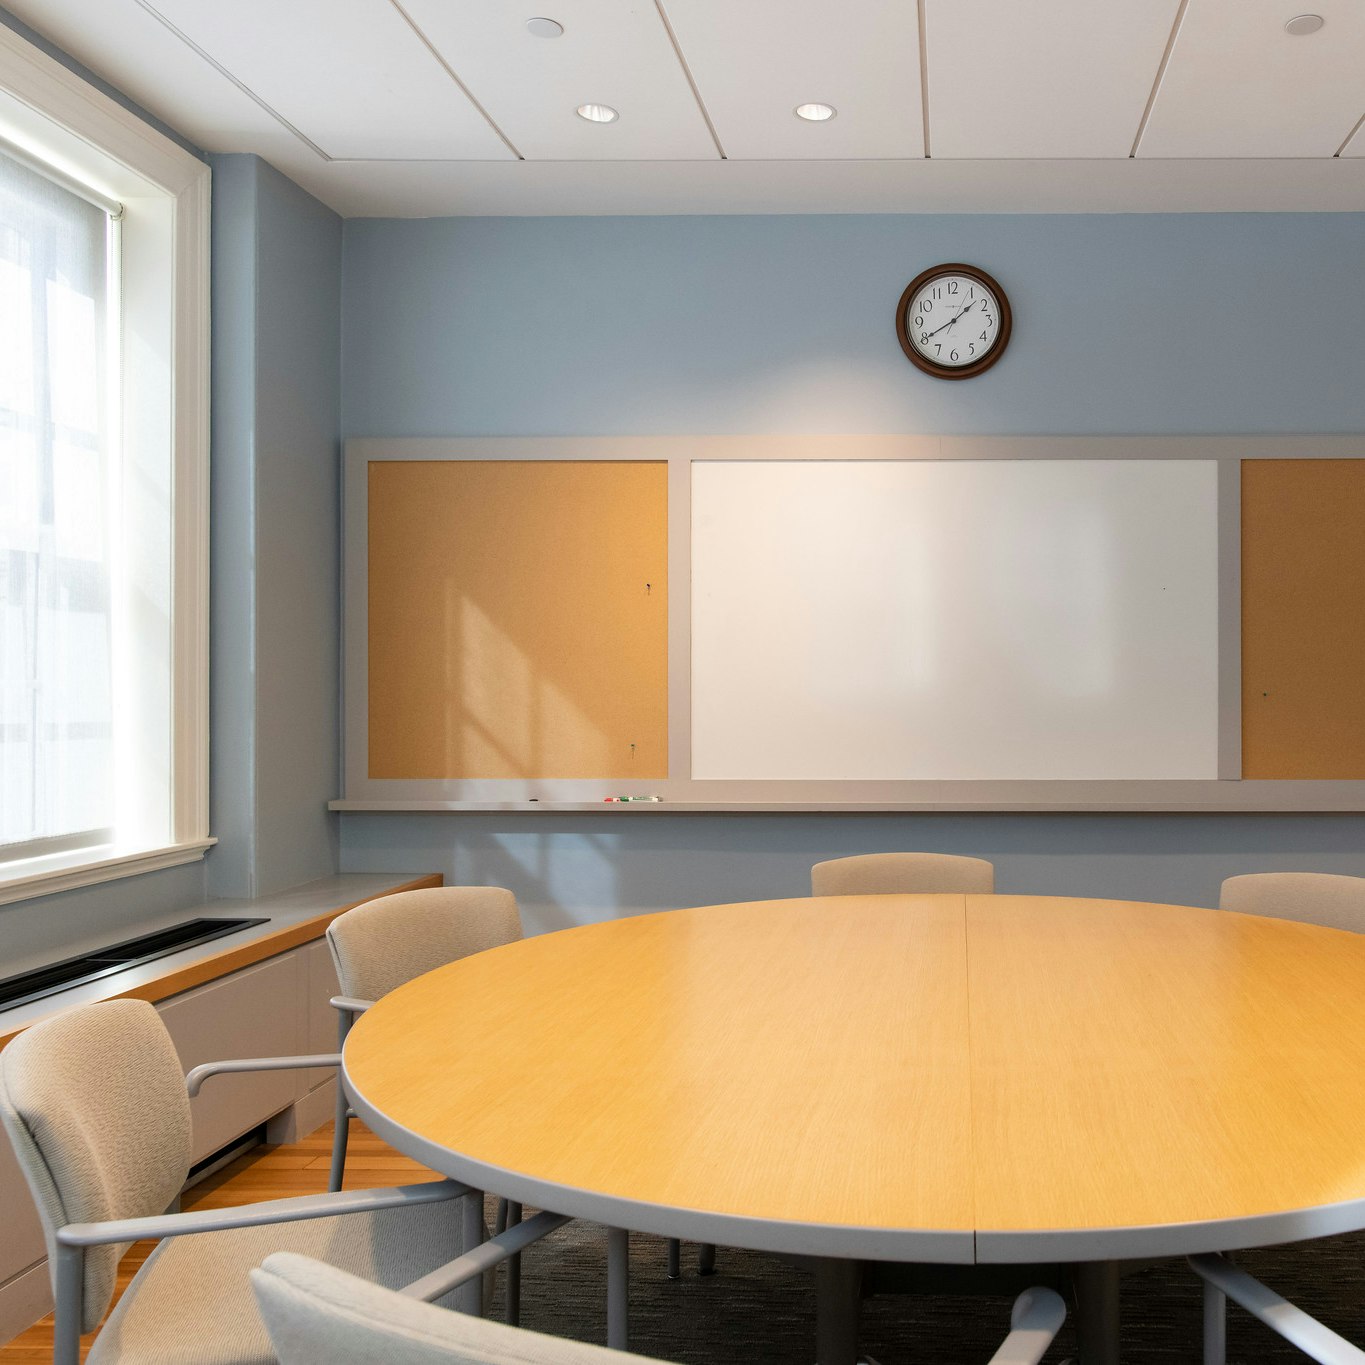 Circular conference room table, seating for 7 people. To the right is an entrance of two white double doors, and to the left are some windows letting in natural light. In the back center of the room is a whiteboard and a clock mounted directly above it.